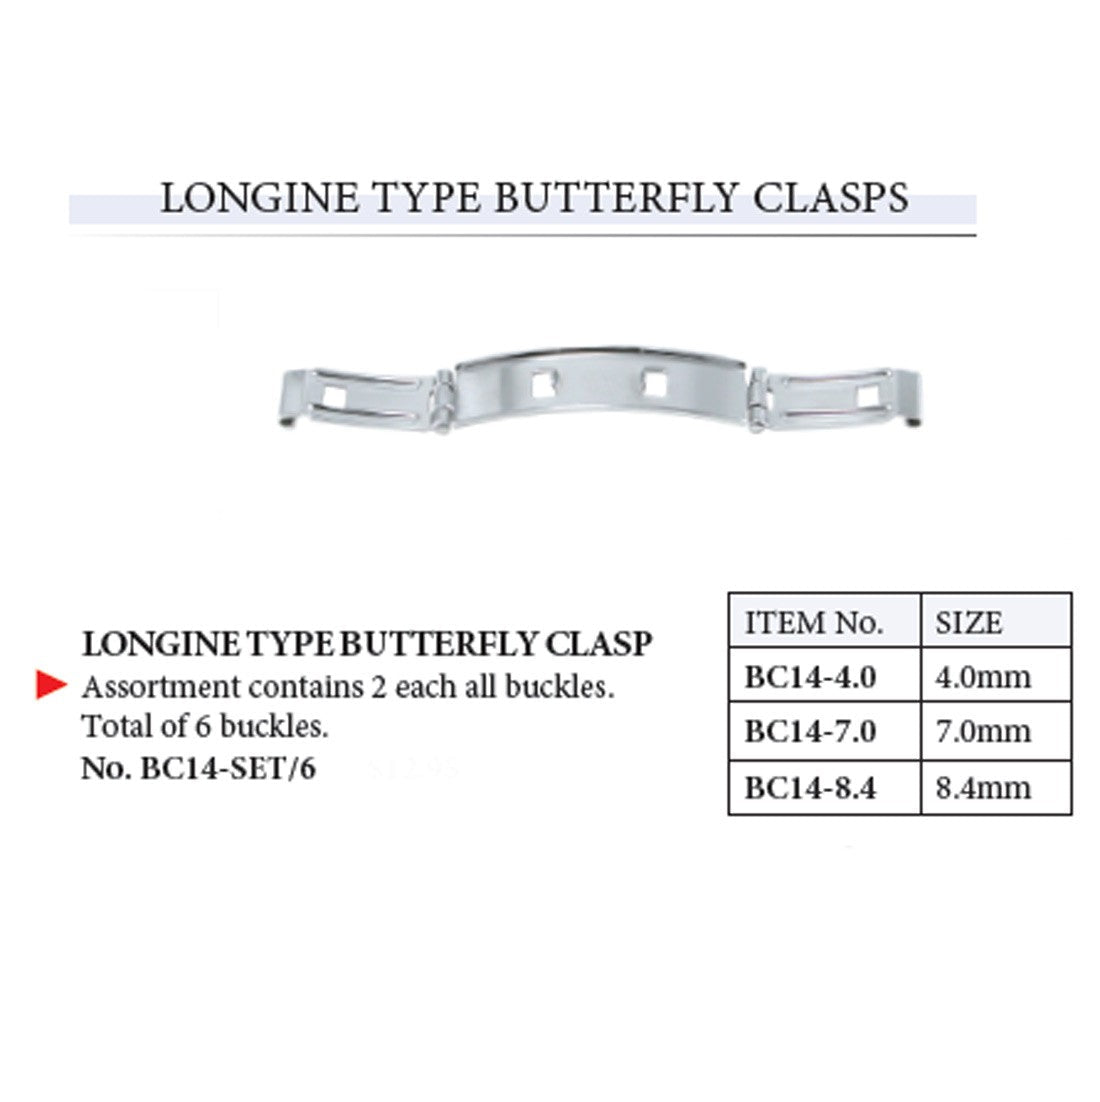 Longine Type Butterfly Clasp